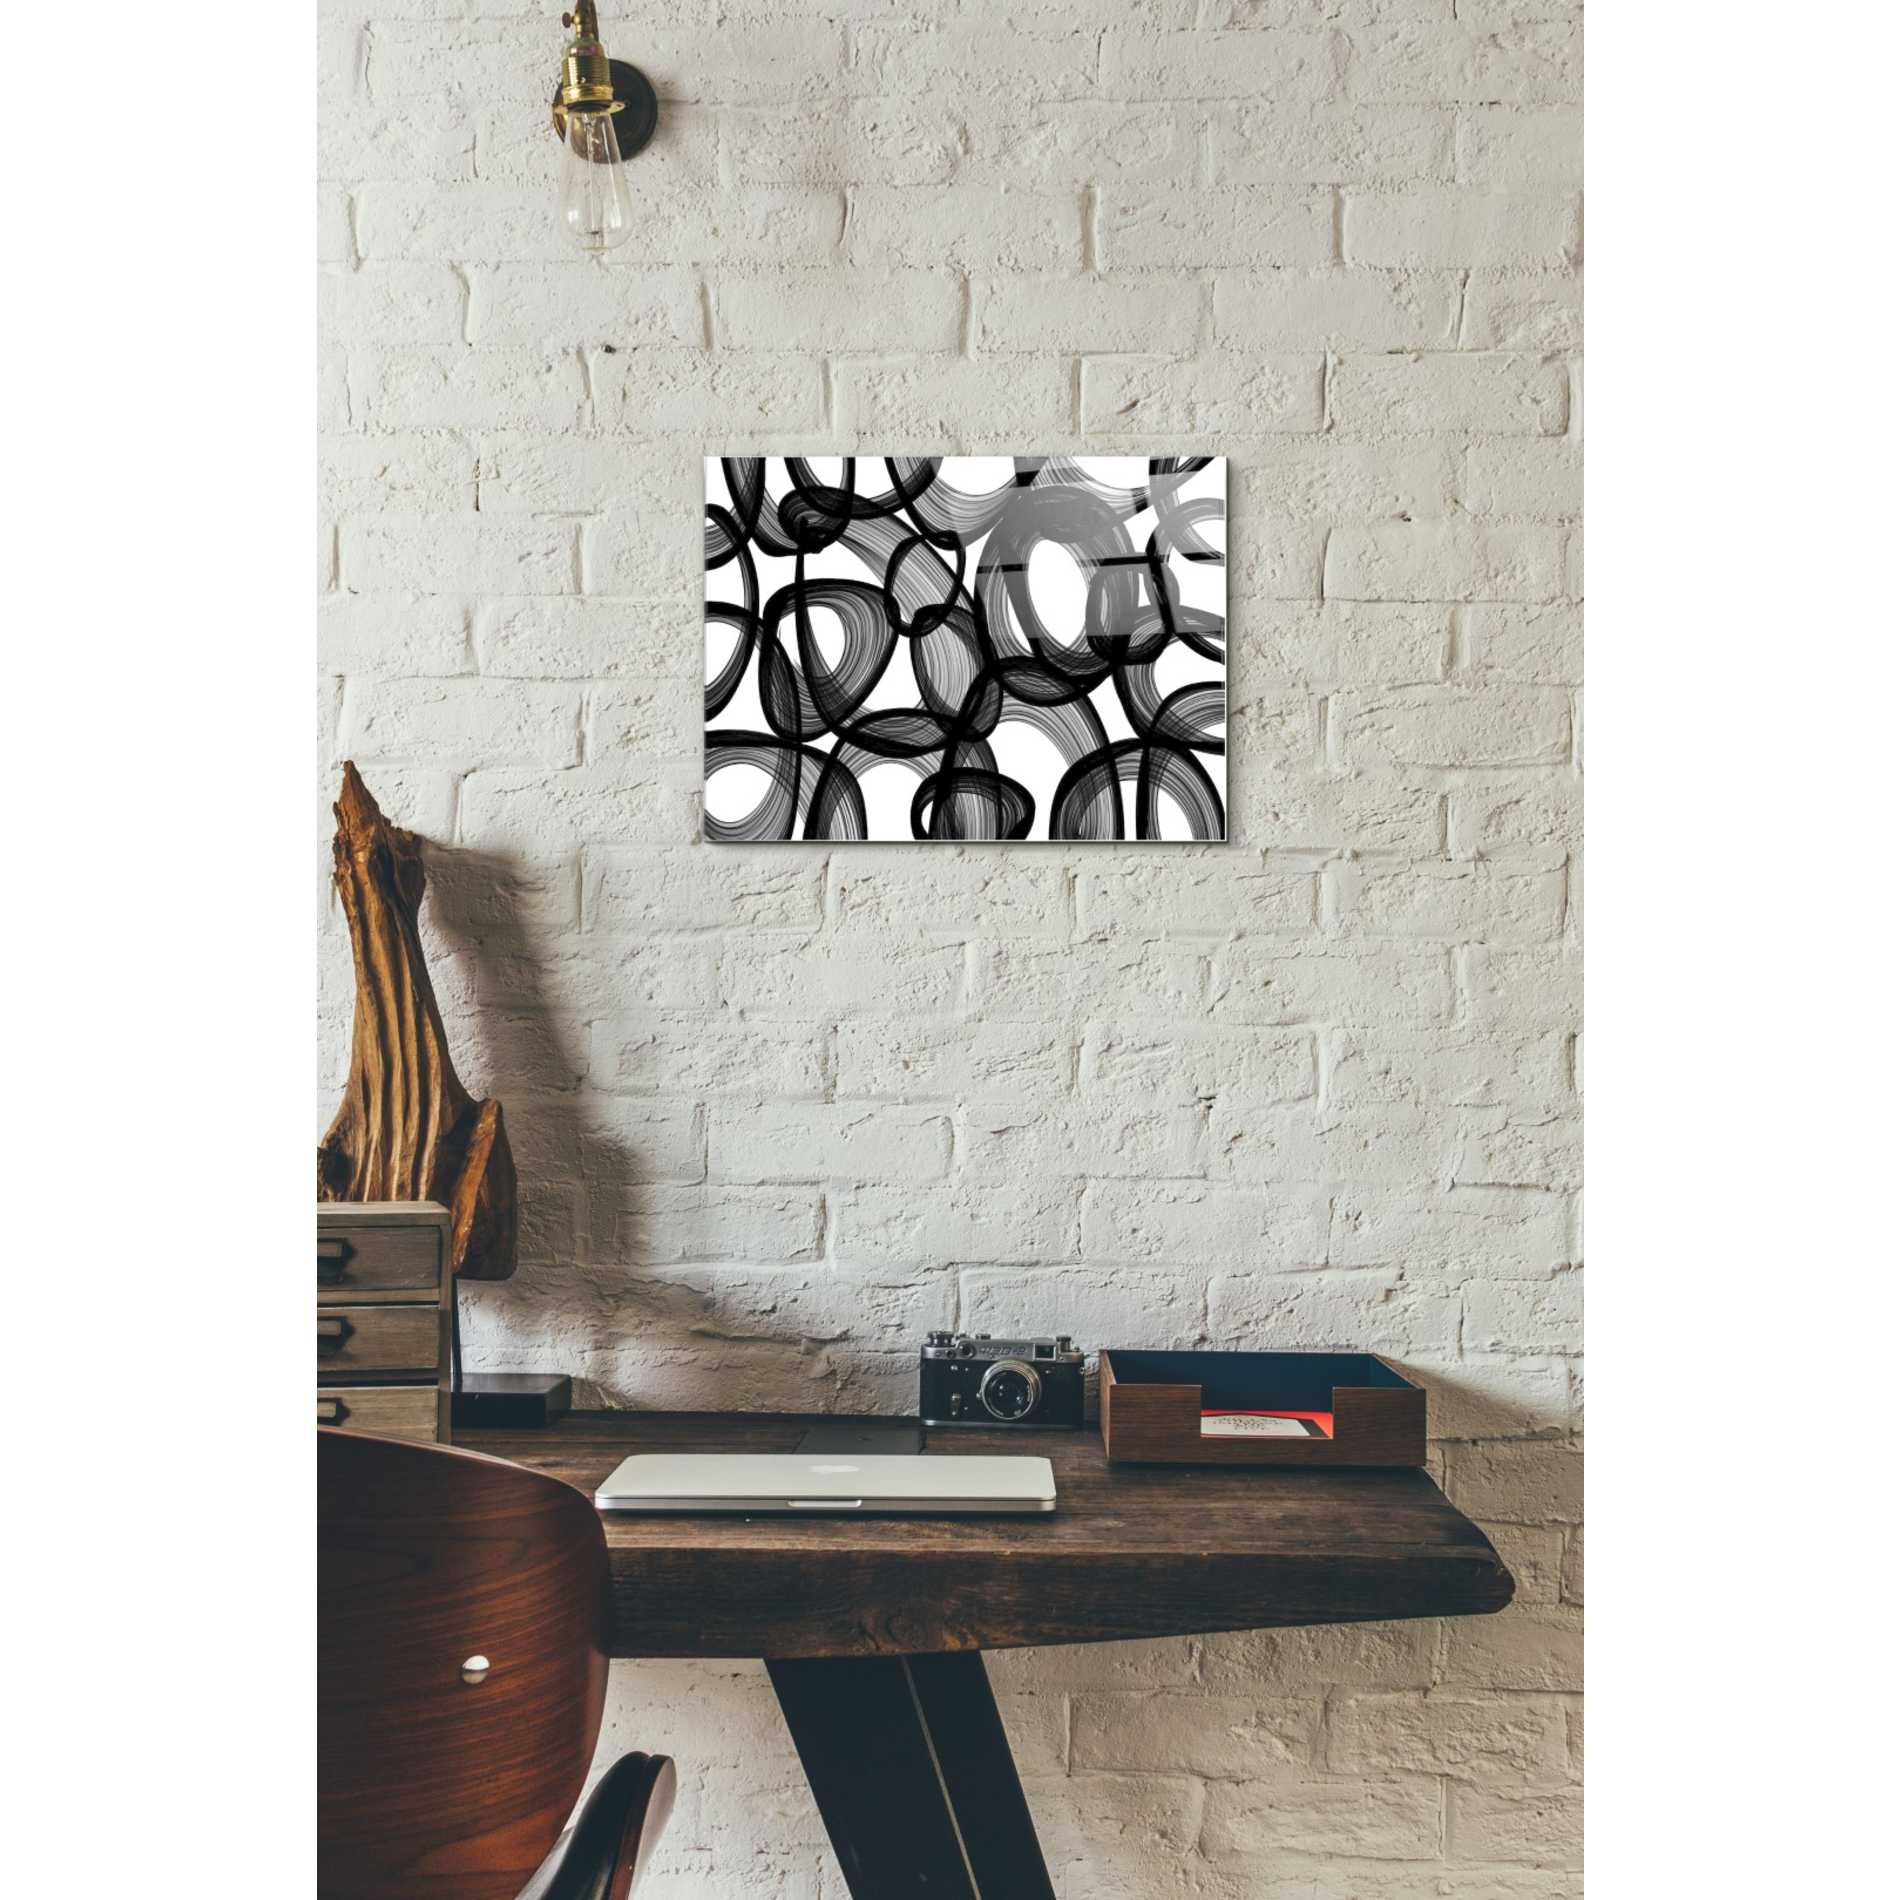 Epic Art 'Abstract Black and White 2015' by Irena Orlov, Acrylic Glass Wall Art,12x16